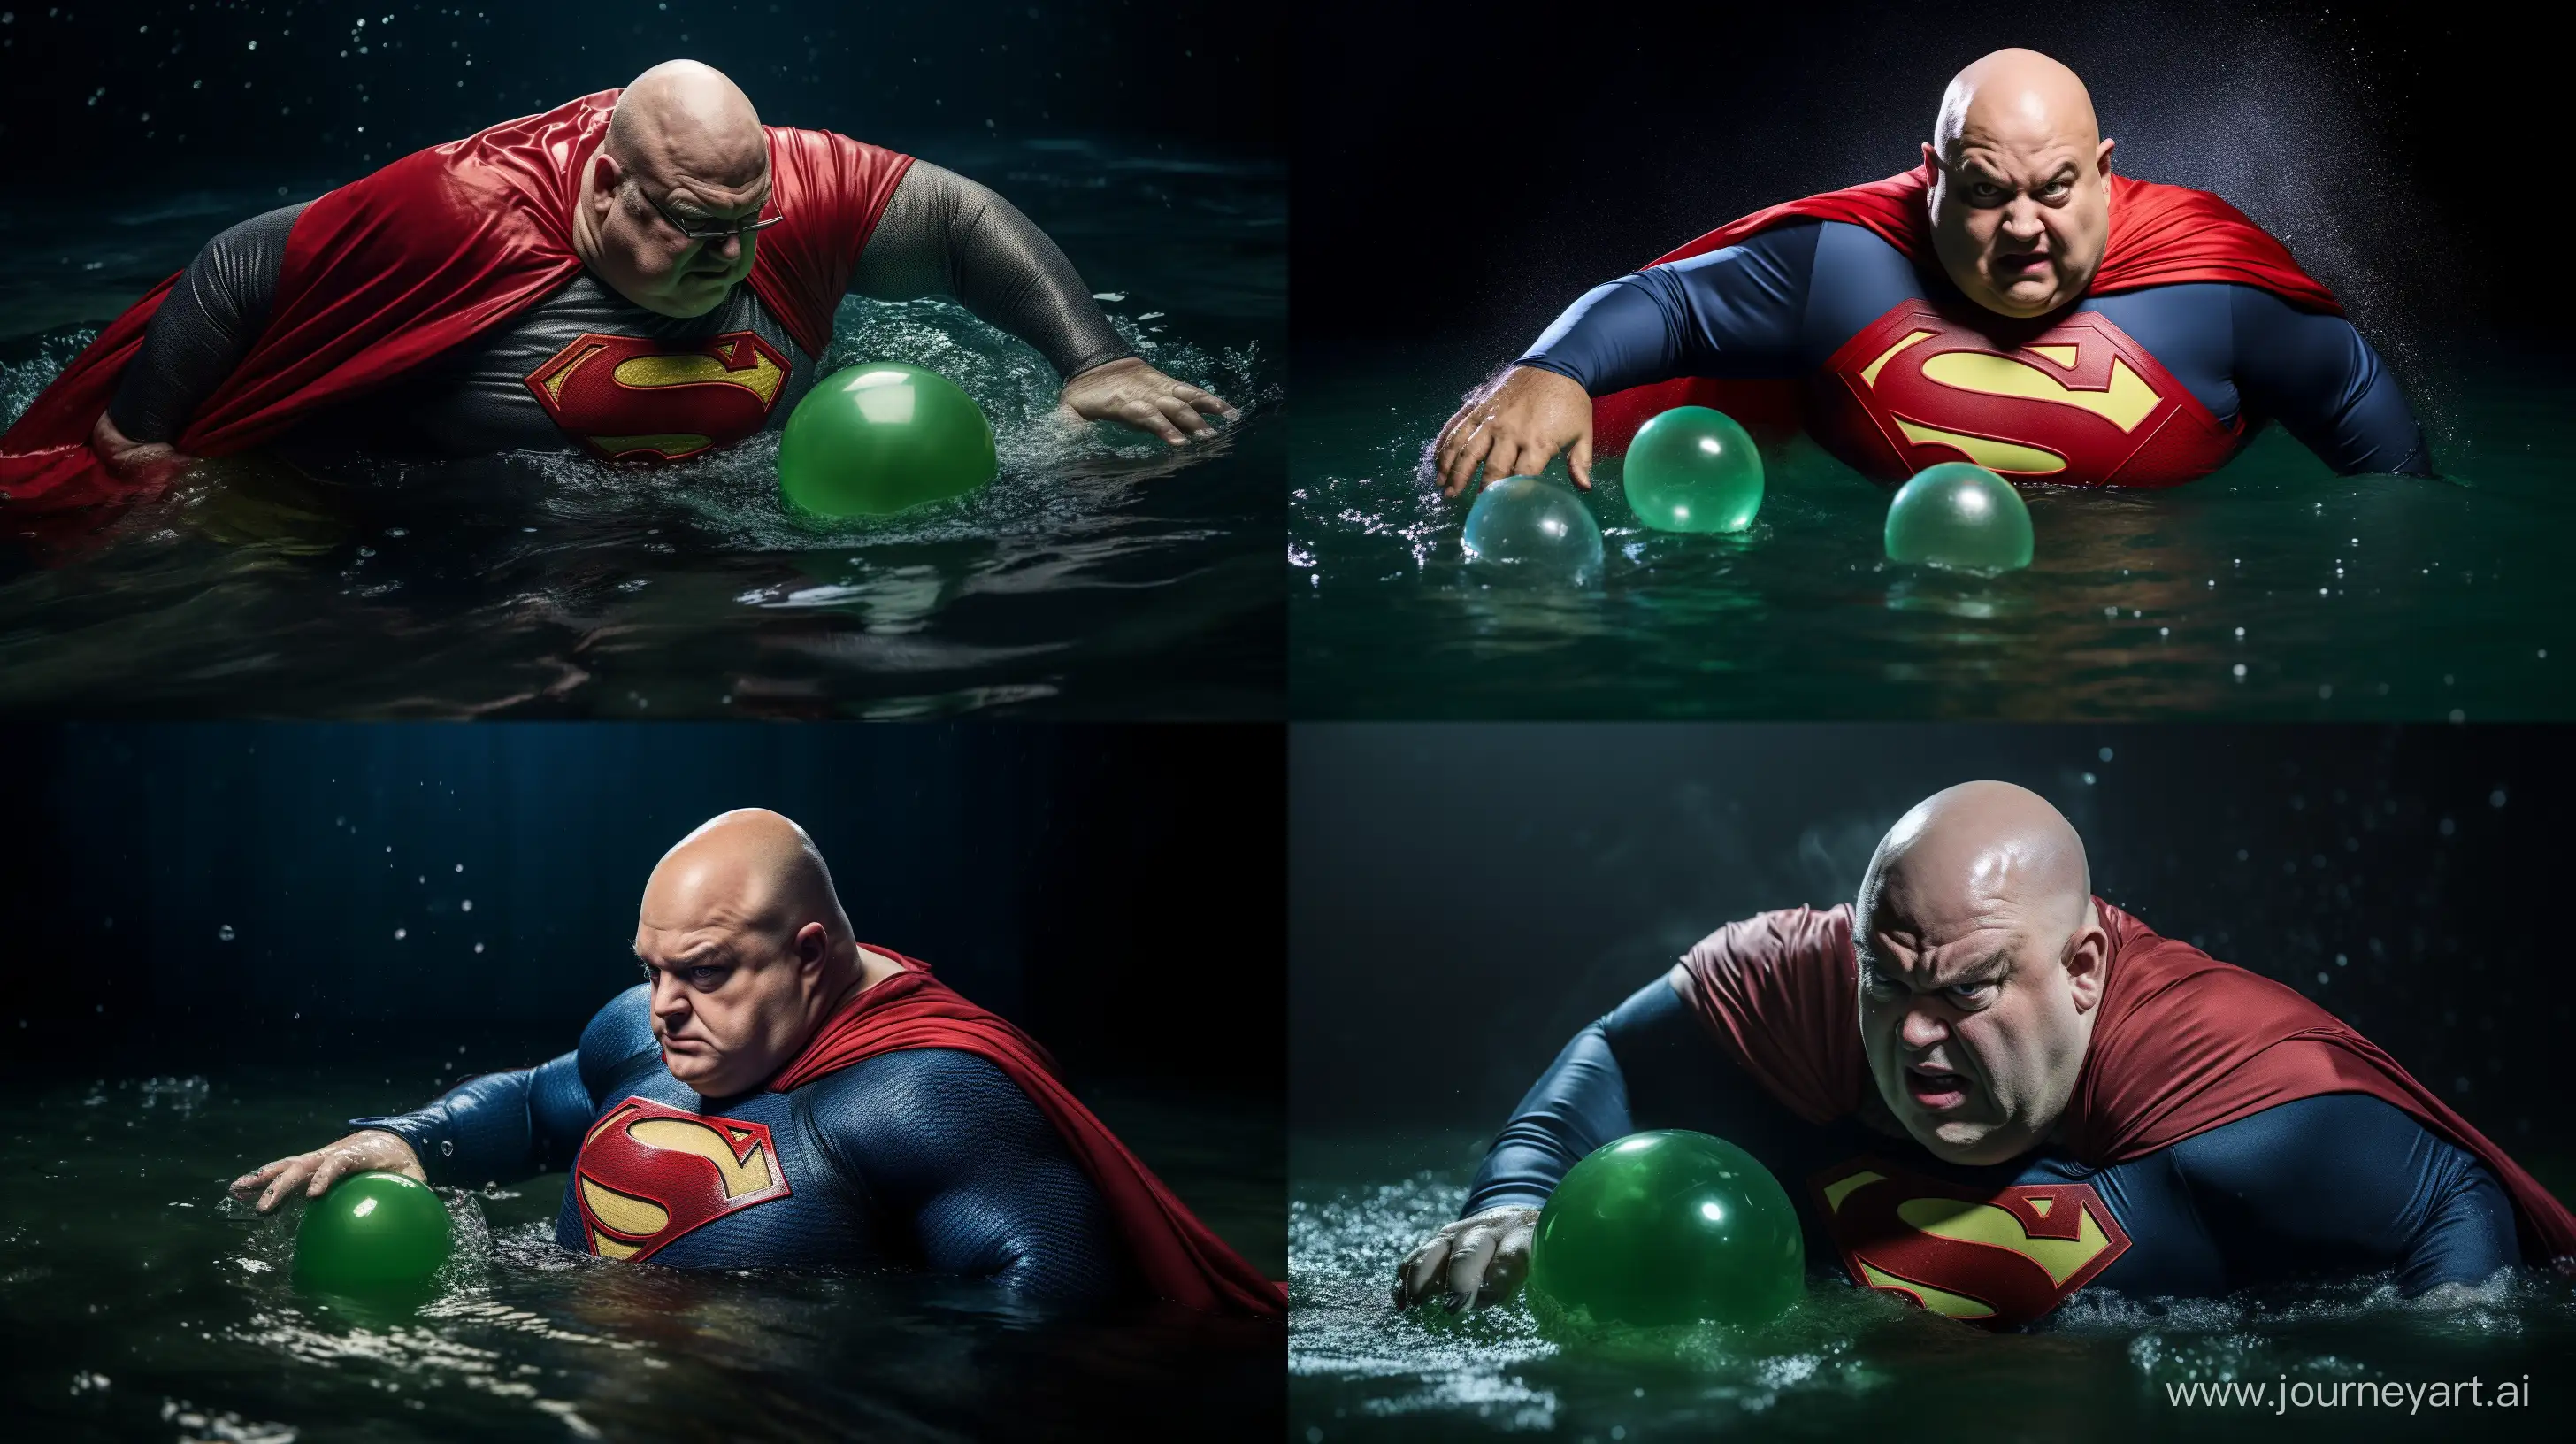 Elderly-Supermans-Playful-Pool-Escape-with-Green-Ball